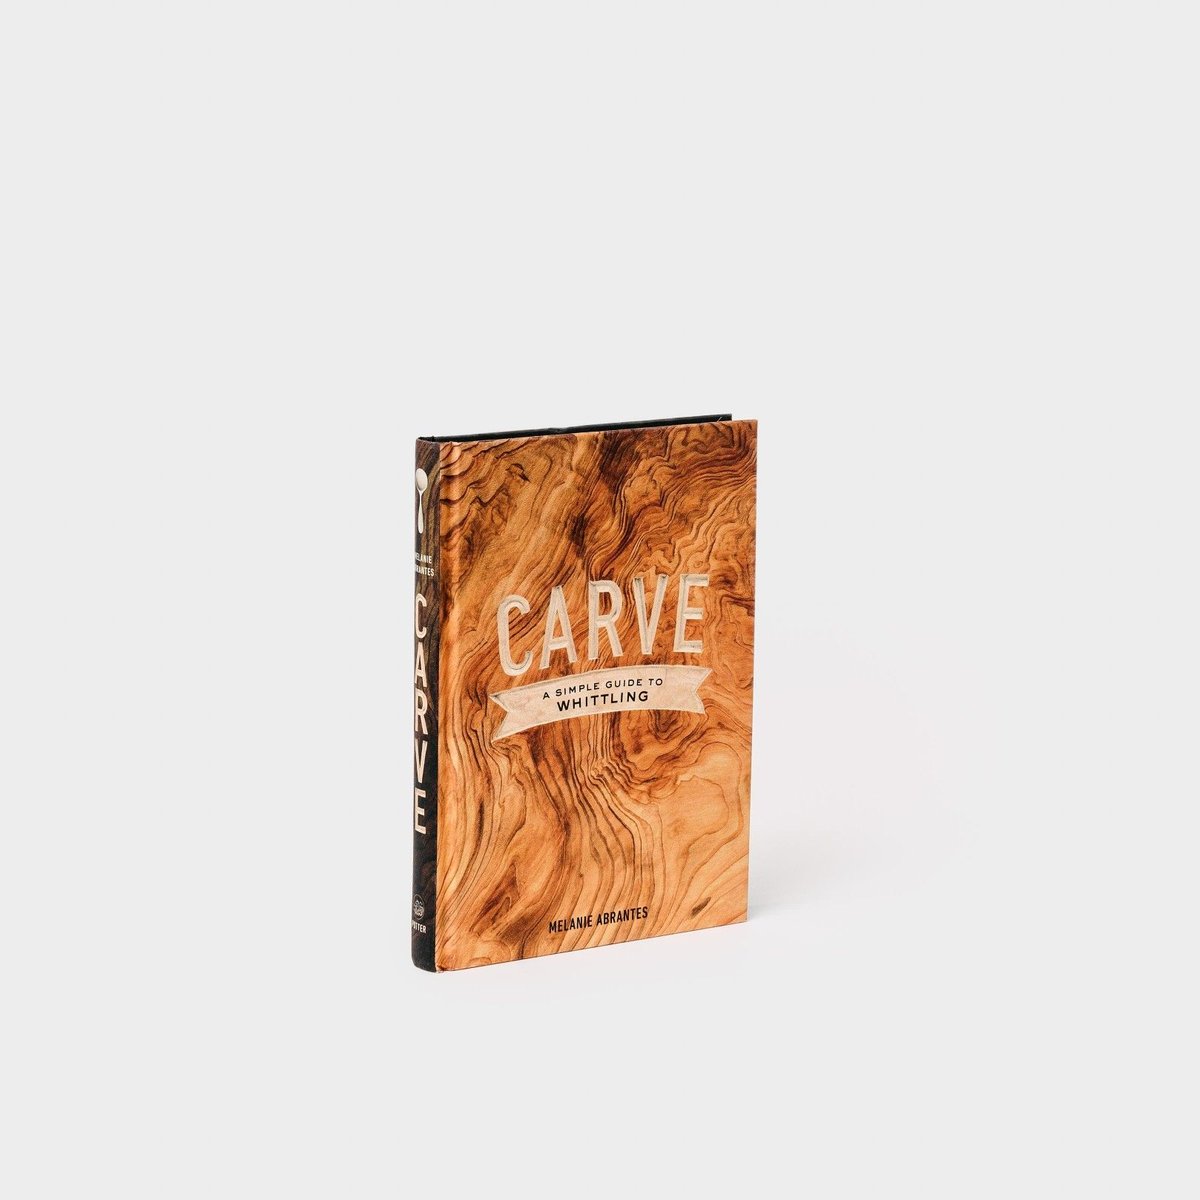 Image of Carve, A Simple Guide to Whittling Book by Melanie Abrantes  - Preorder